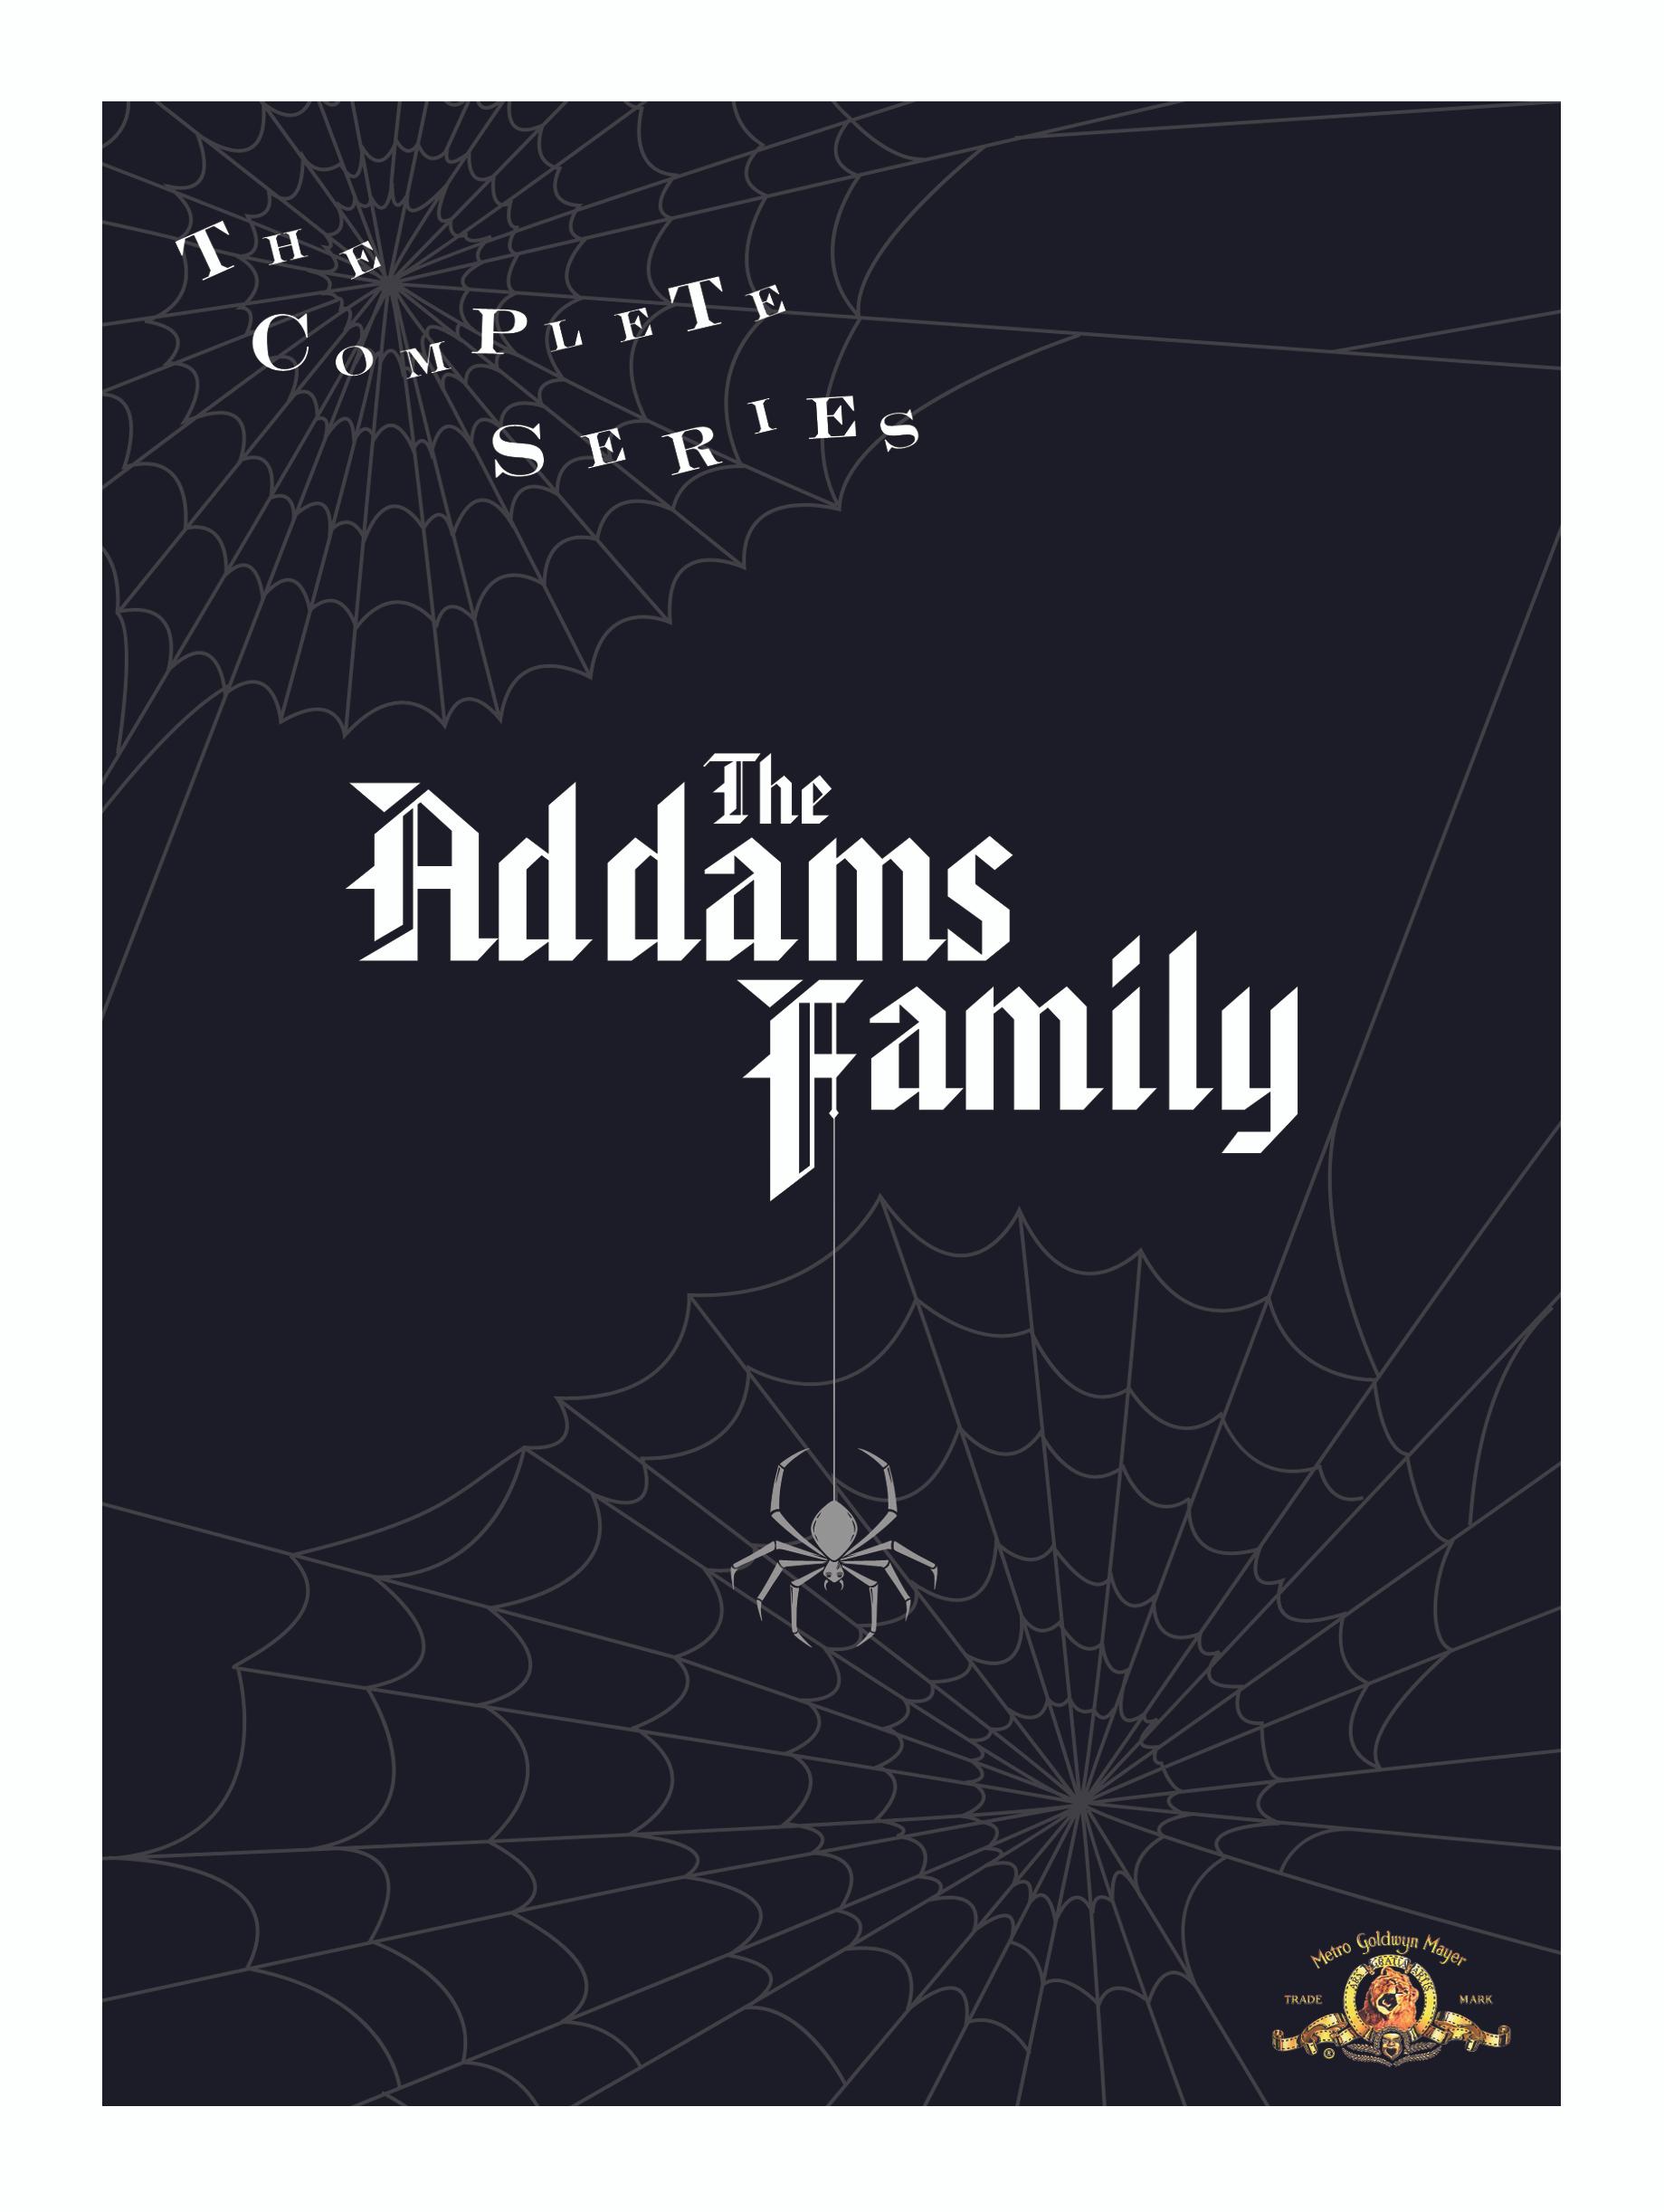 The Addams Family: The Complete Seasons 1-3 (Box Set) - DVD [ 1966 ]  - Comedy Television On DVD - TV Shows On GRUV